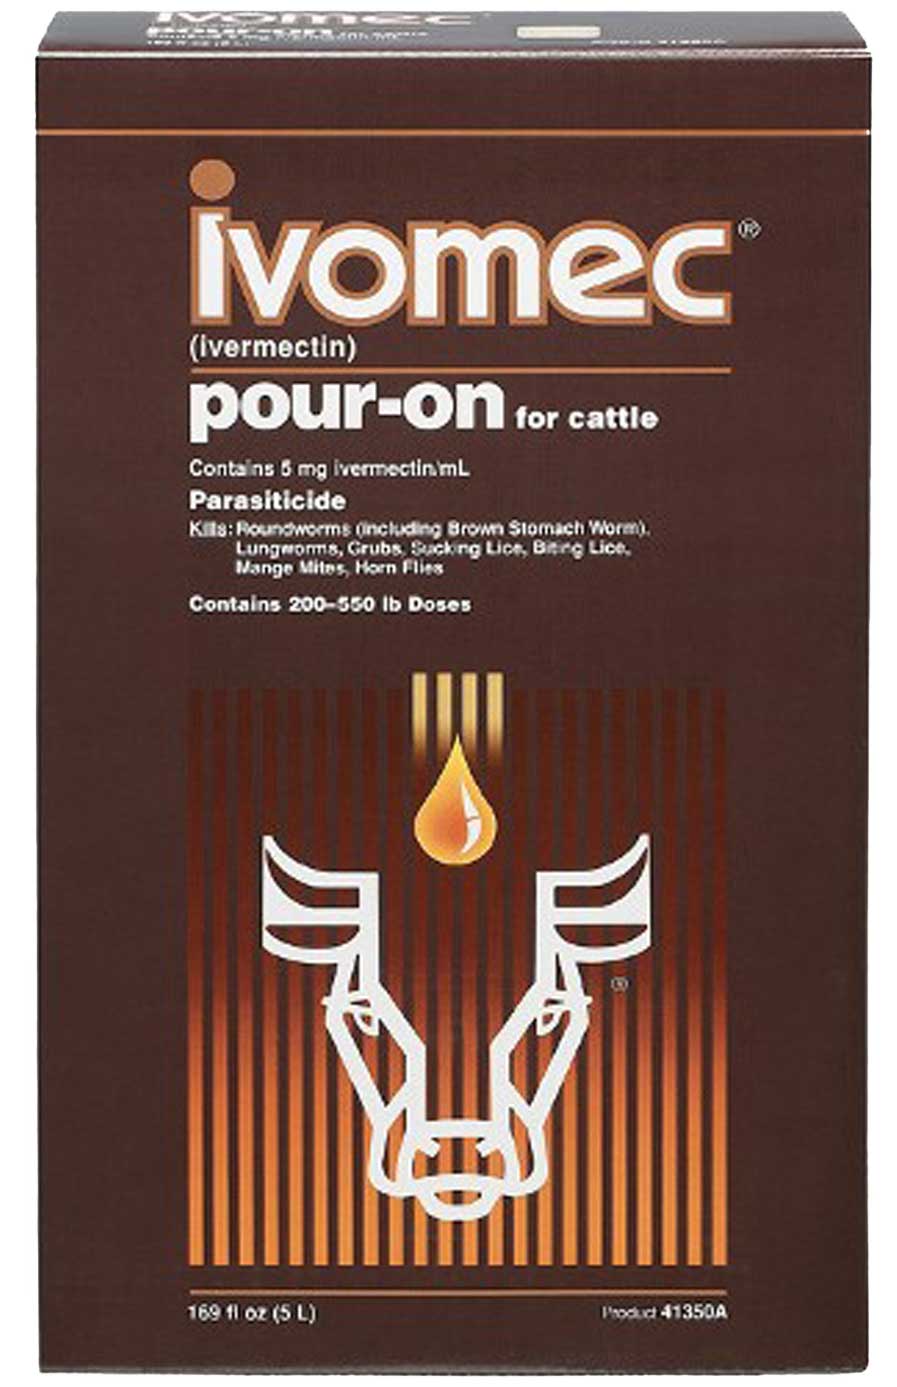 IVOMEC POUR-ON 5 Liter BEEF